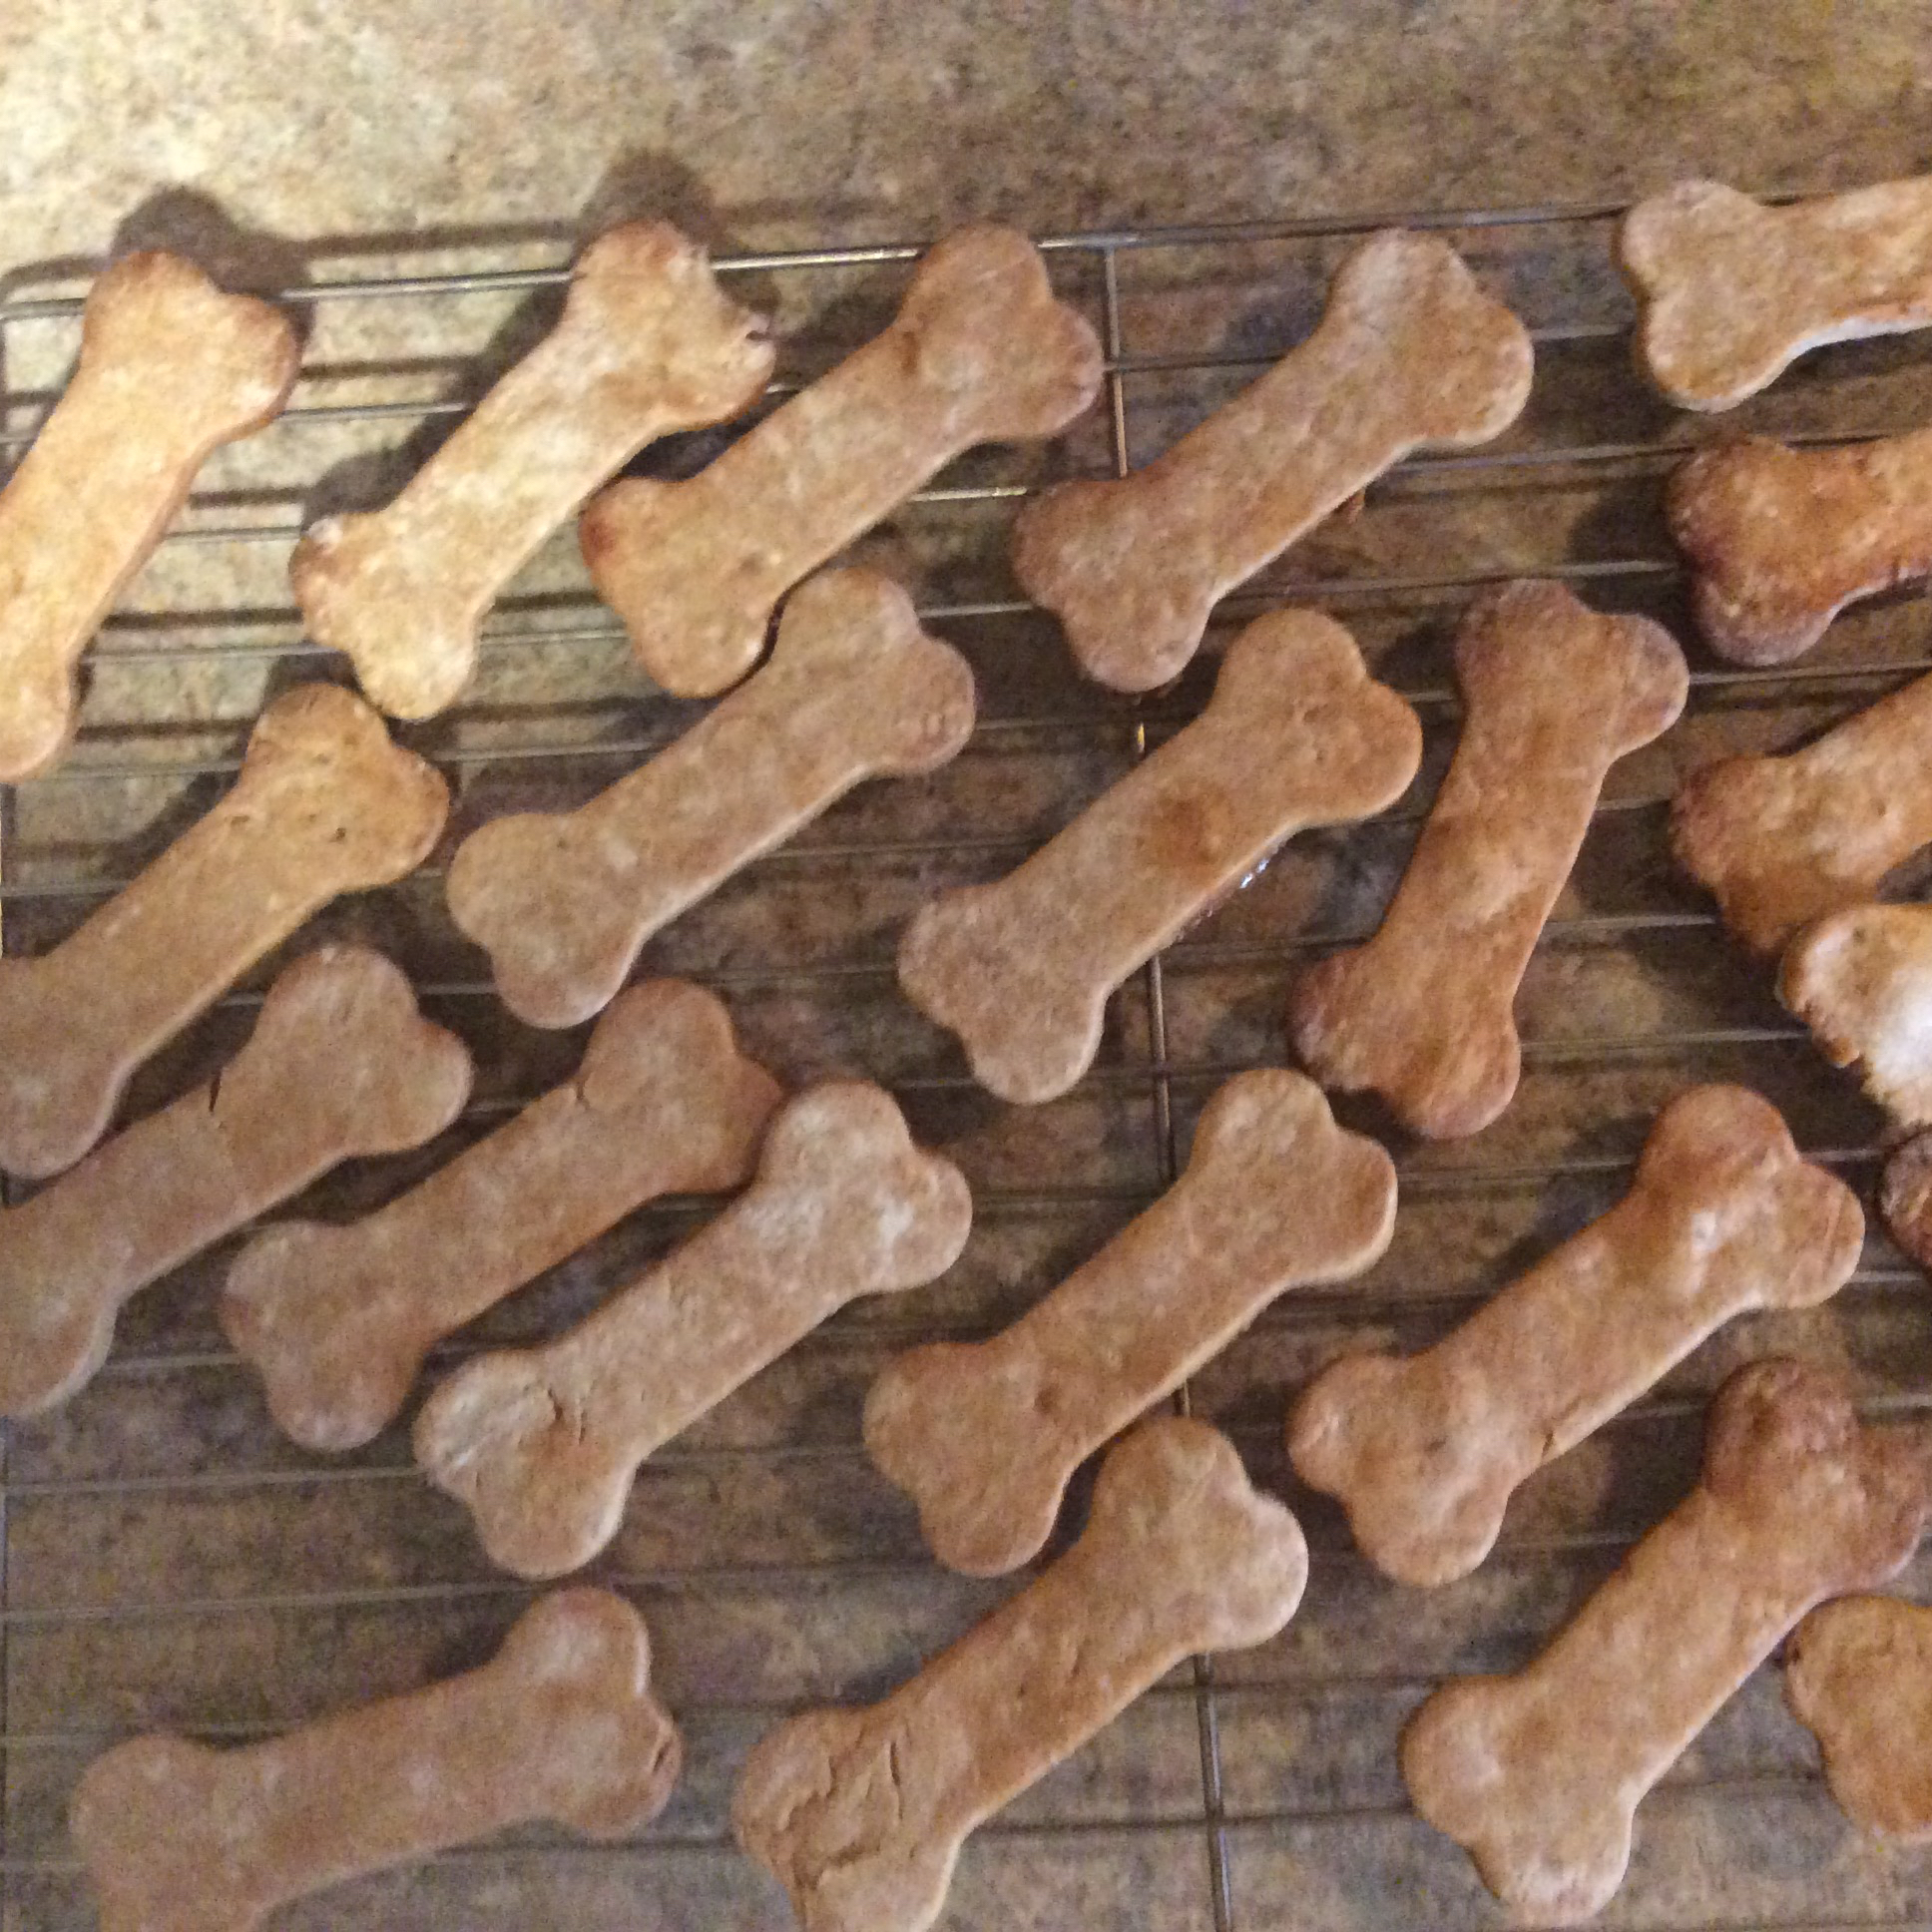 Peanut Butter and Banana Dog Biscuits 